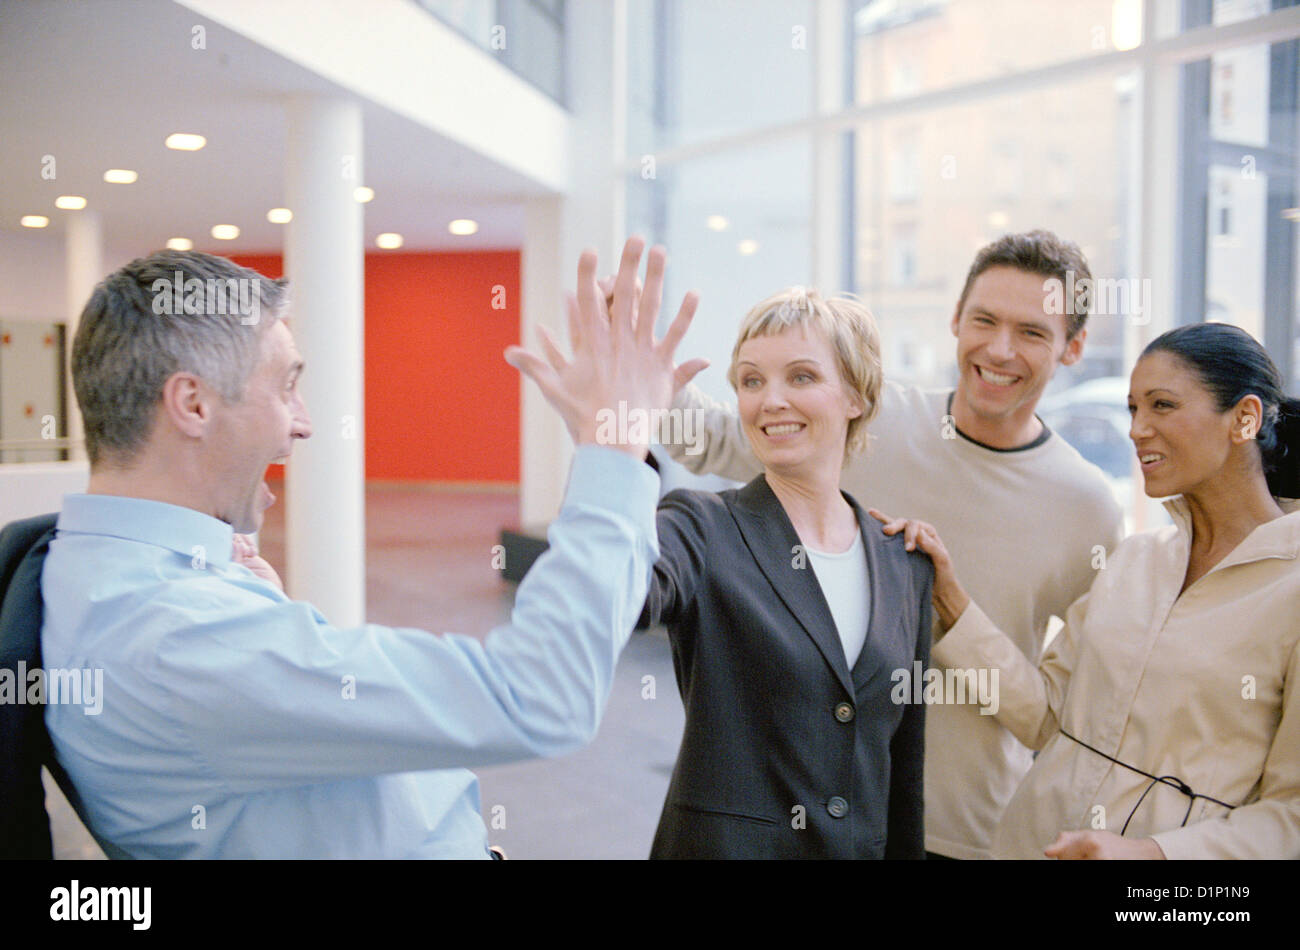 Two business people to give so a high five License free except ads and billboards Stock Photo